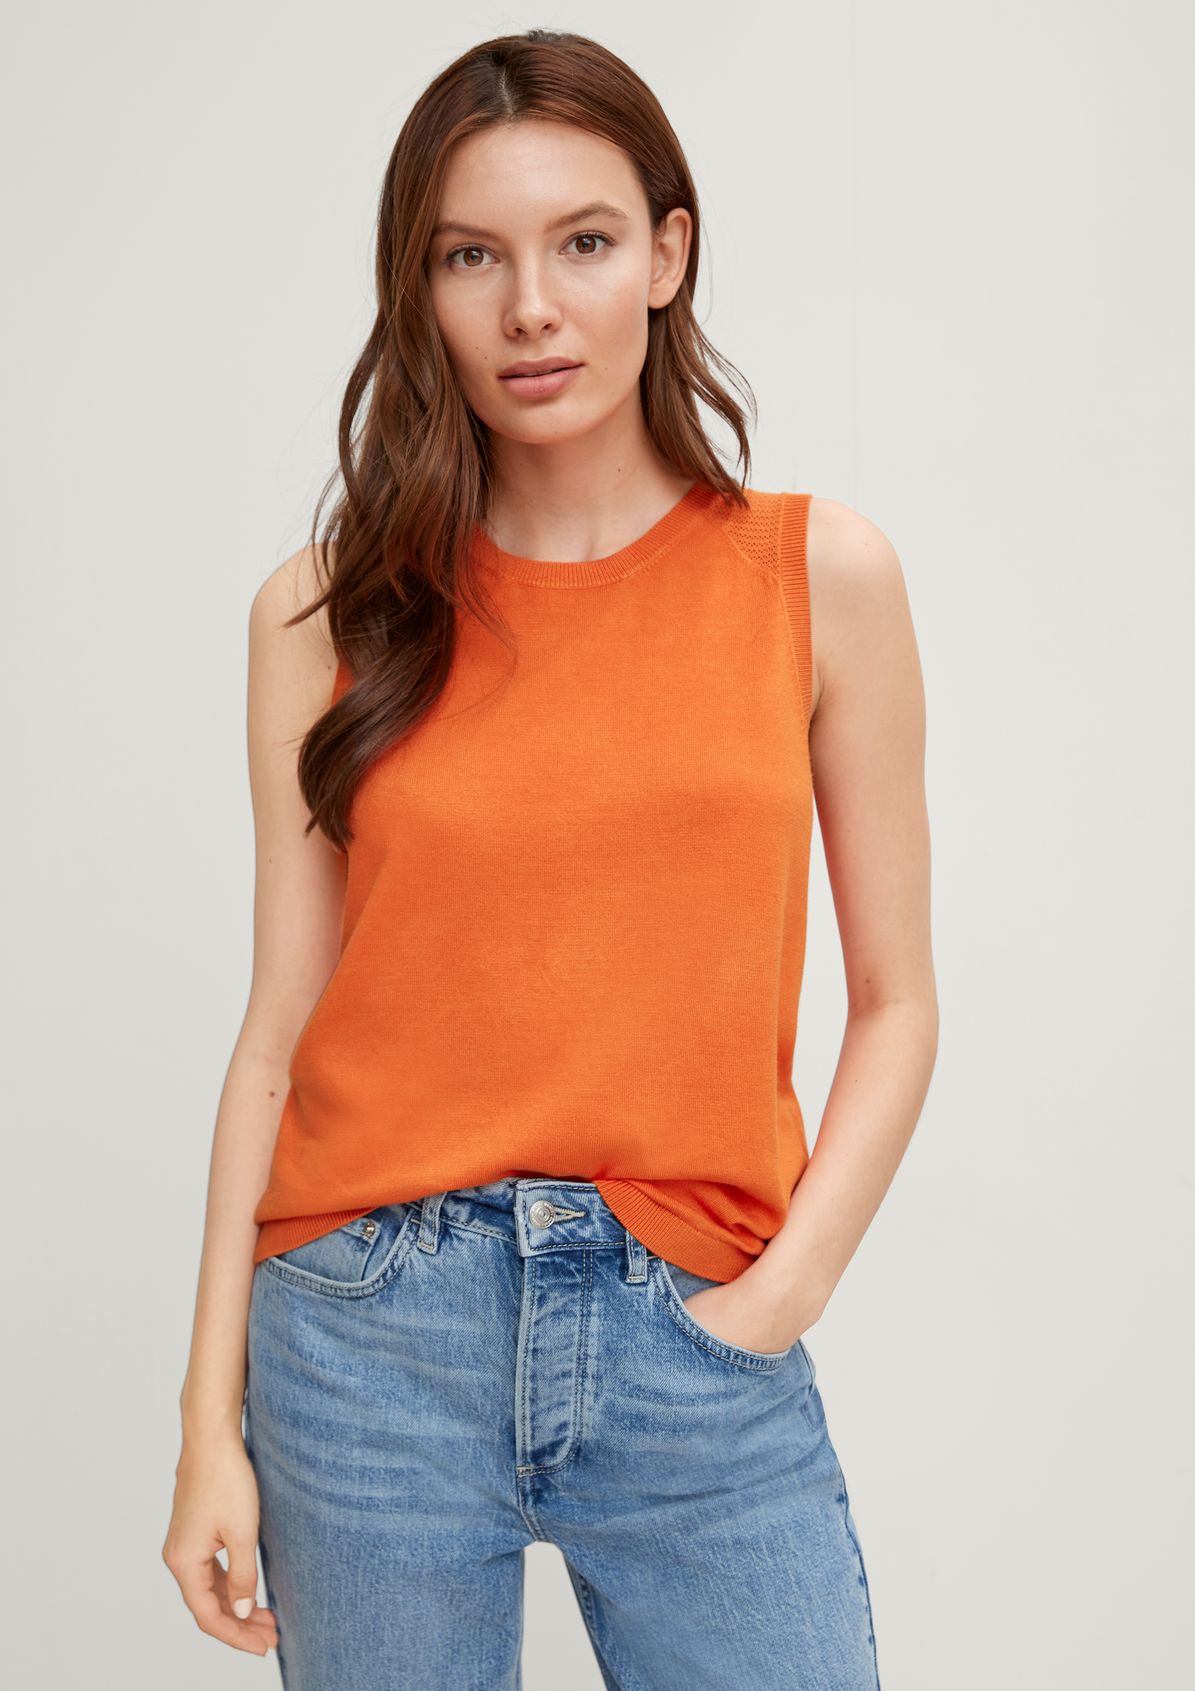 Viscose blend top from comma